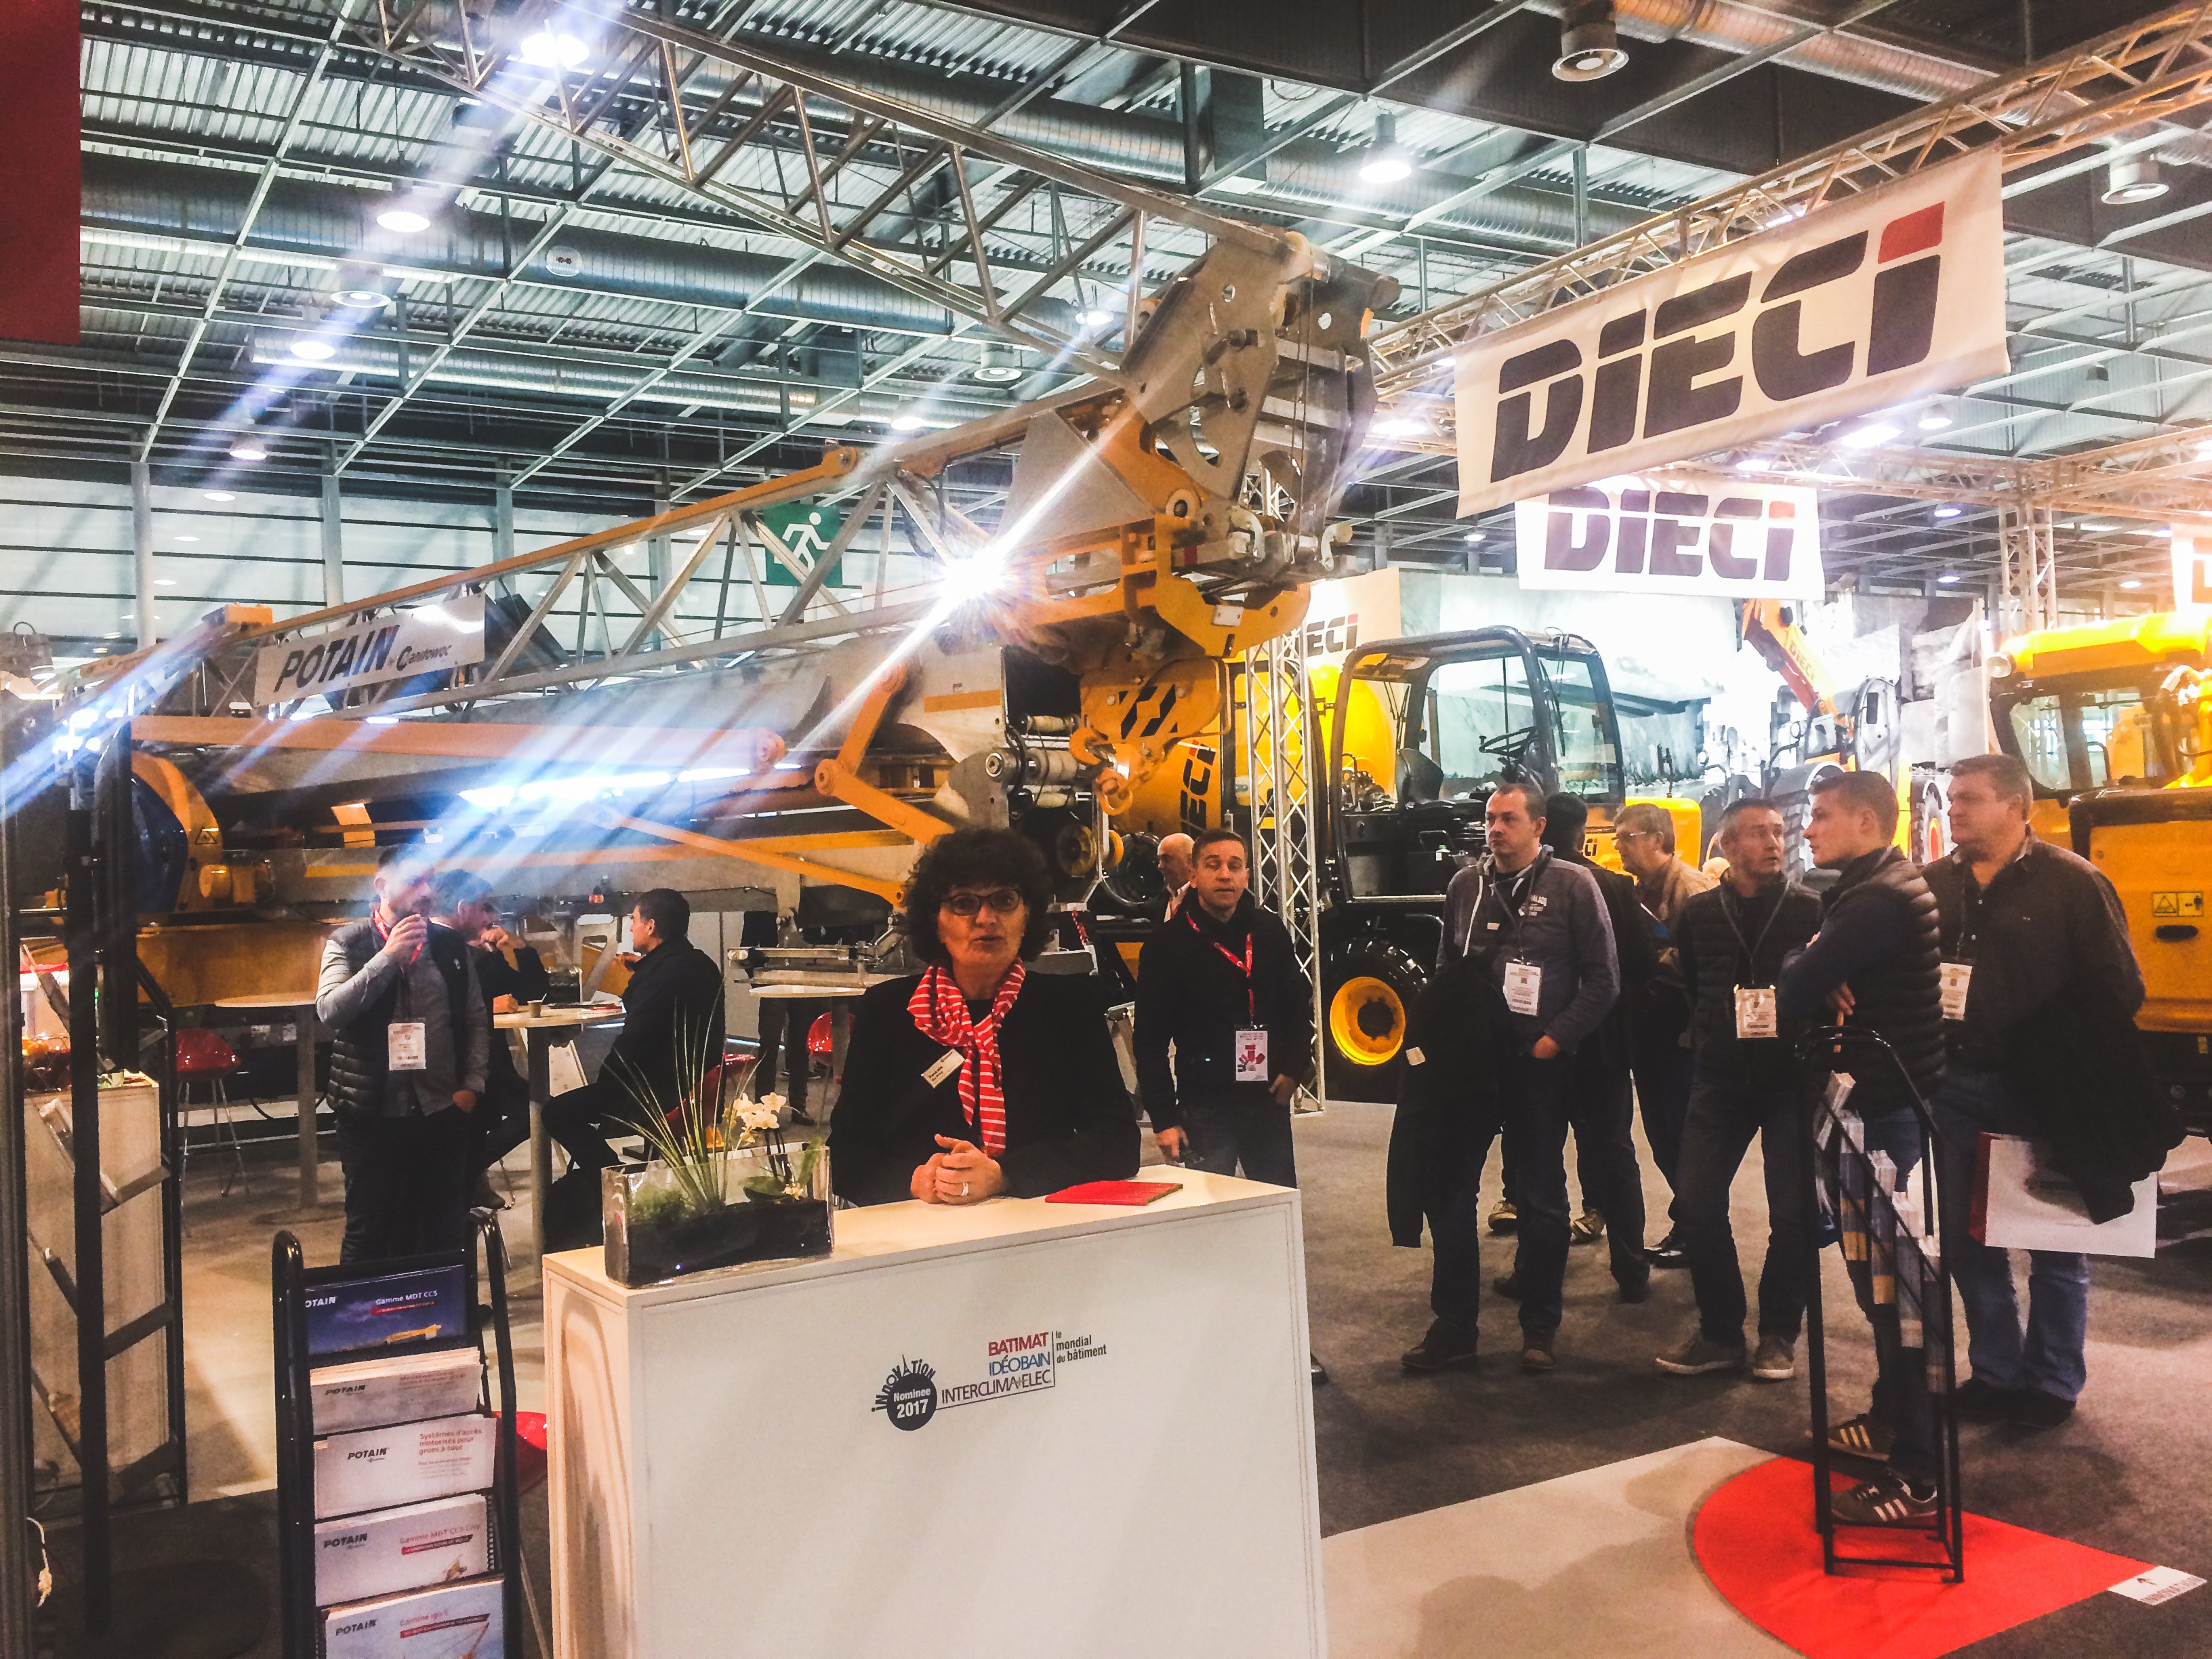 Potain once again showcased the strength of its self-erecting crane range at Batimat 2017. From November 6 – 10, Potain occupied both indoor and outdoor booths at Batimat, displaying two Igo M cranes that are ideal for small contractors and other lifters that require compact, easily transportable lifting solutions.